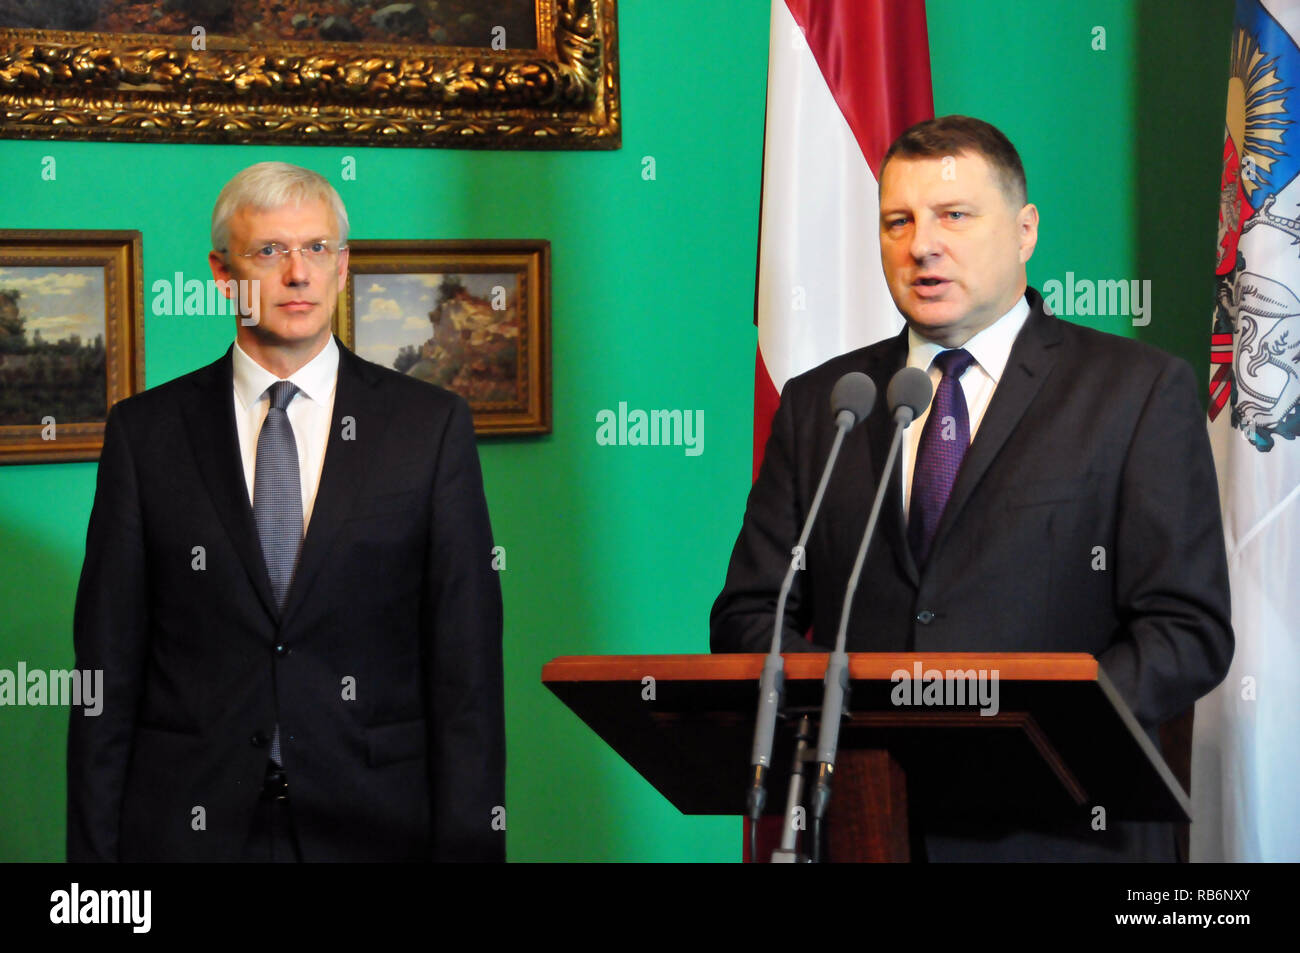 Riga, Latvia. 7th Jan, 2019. Latvian President Raimonds Vejonis (R) and the candidate for prime minister Krisjanis Karins attend a press conference in Riga, Latvia, on Jan. 7, 2019. Raimonds Vejonis on Monday asked Krisjanis Karins, a member of the European Parliament from the center-right New Unity party, to form the Baltic country's next government. Credit: Janis/Xinhua/Alamy Live News Stock Photo